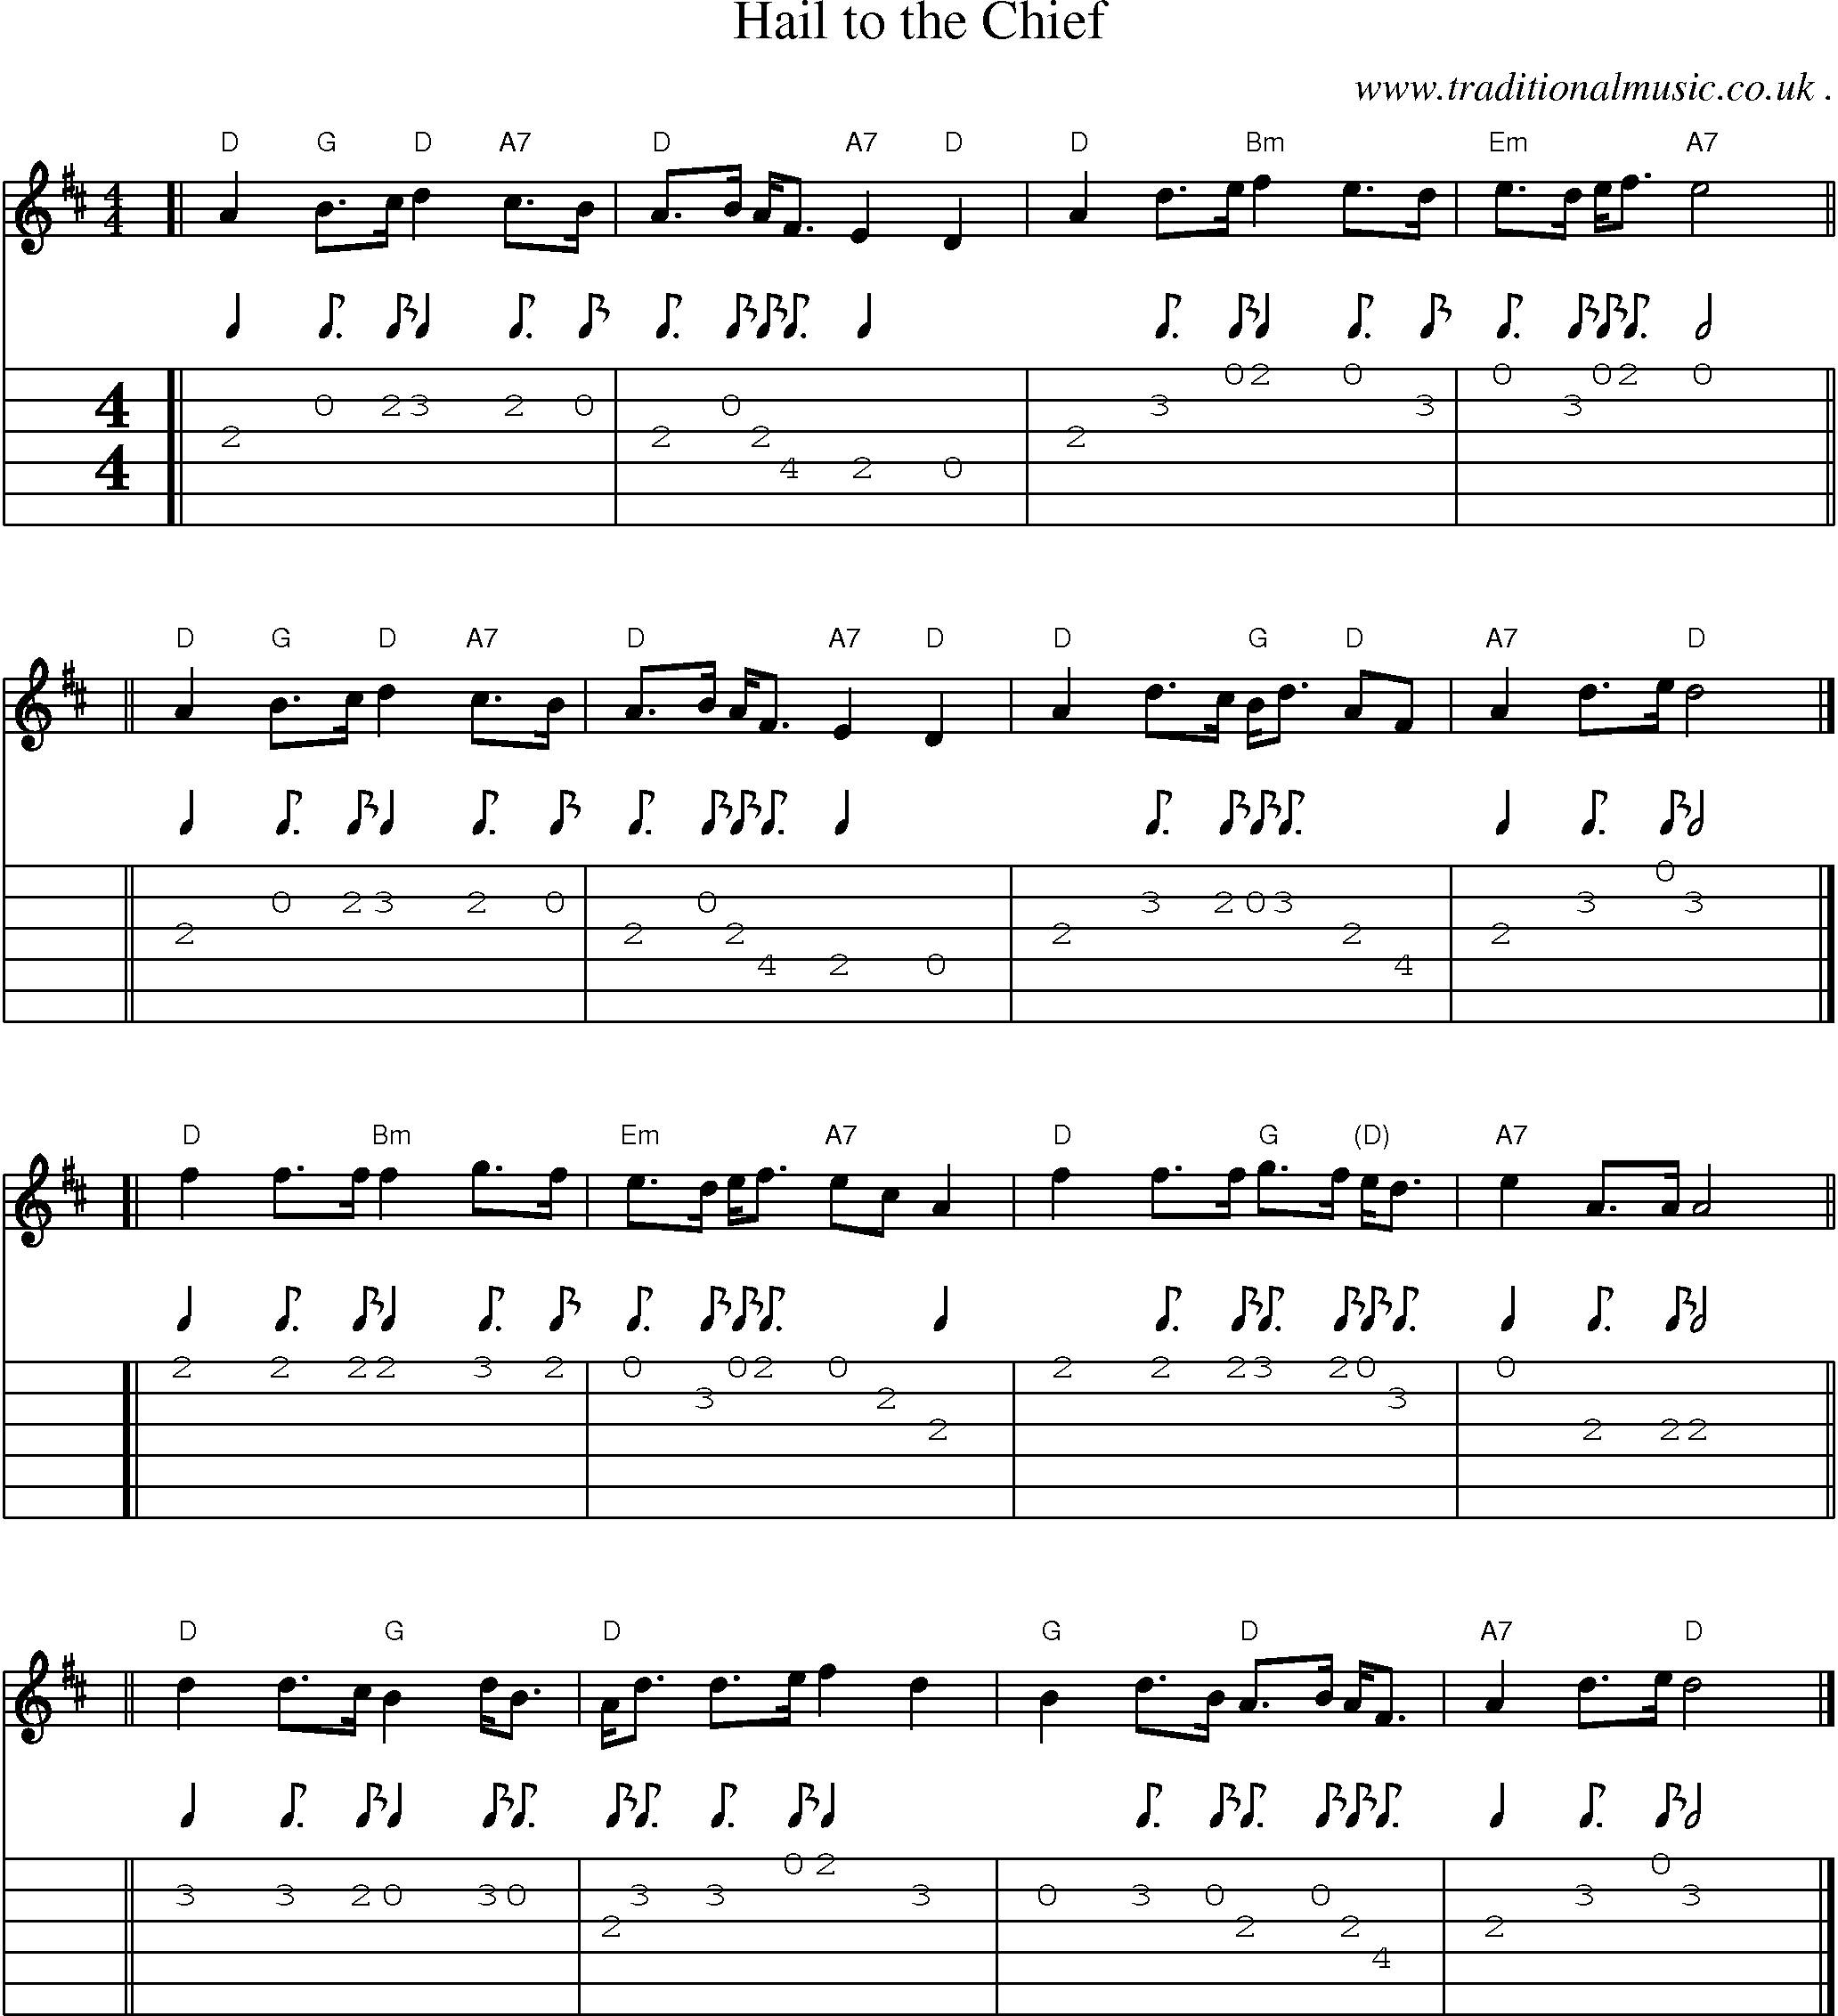 Sheet-music  score, Chords and Guitar Tabs for Hail To The Chief